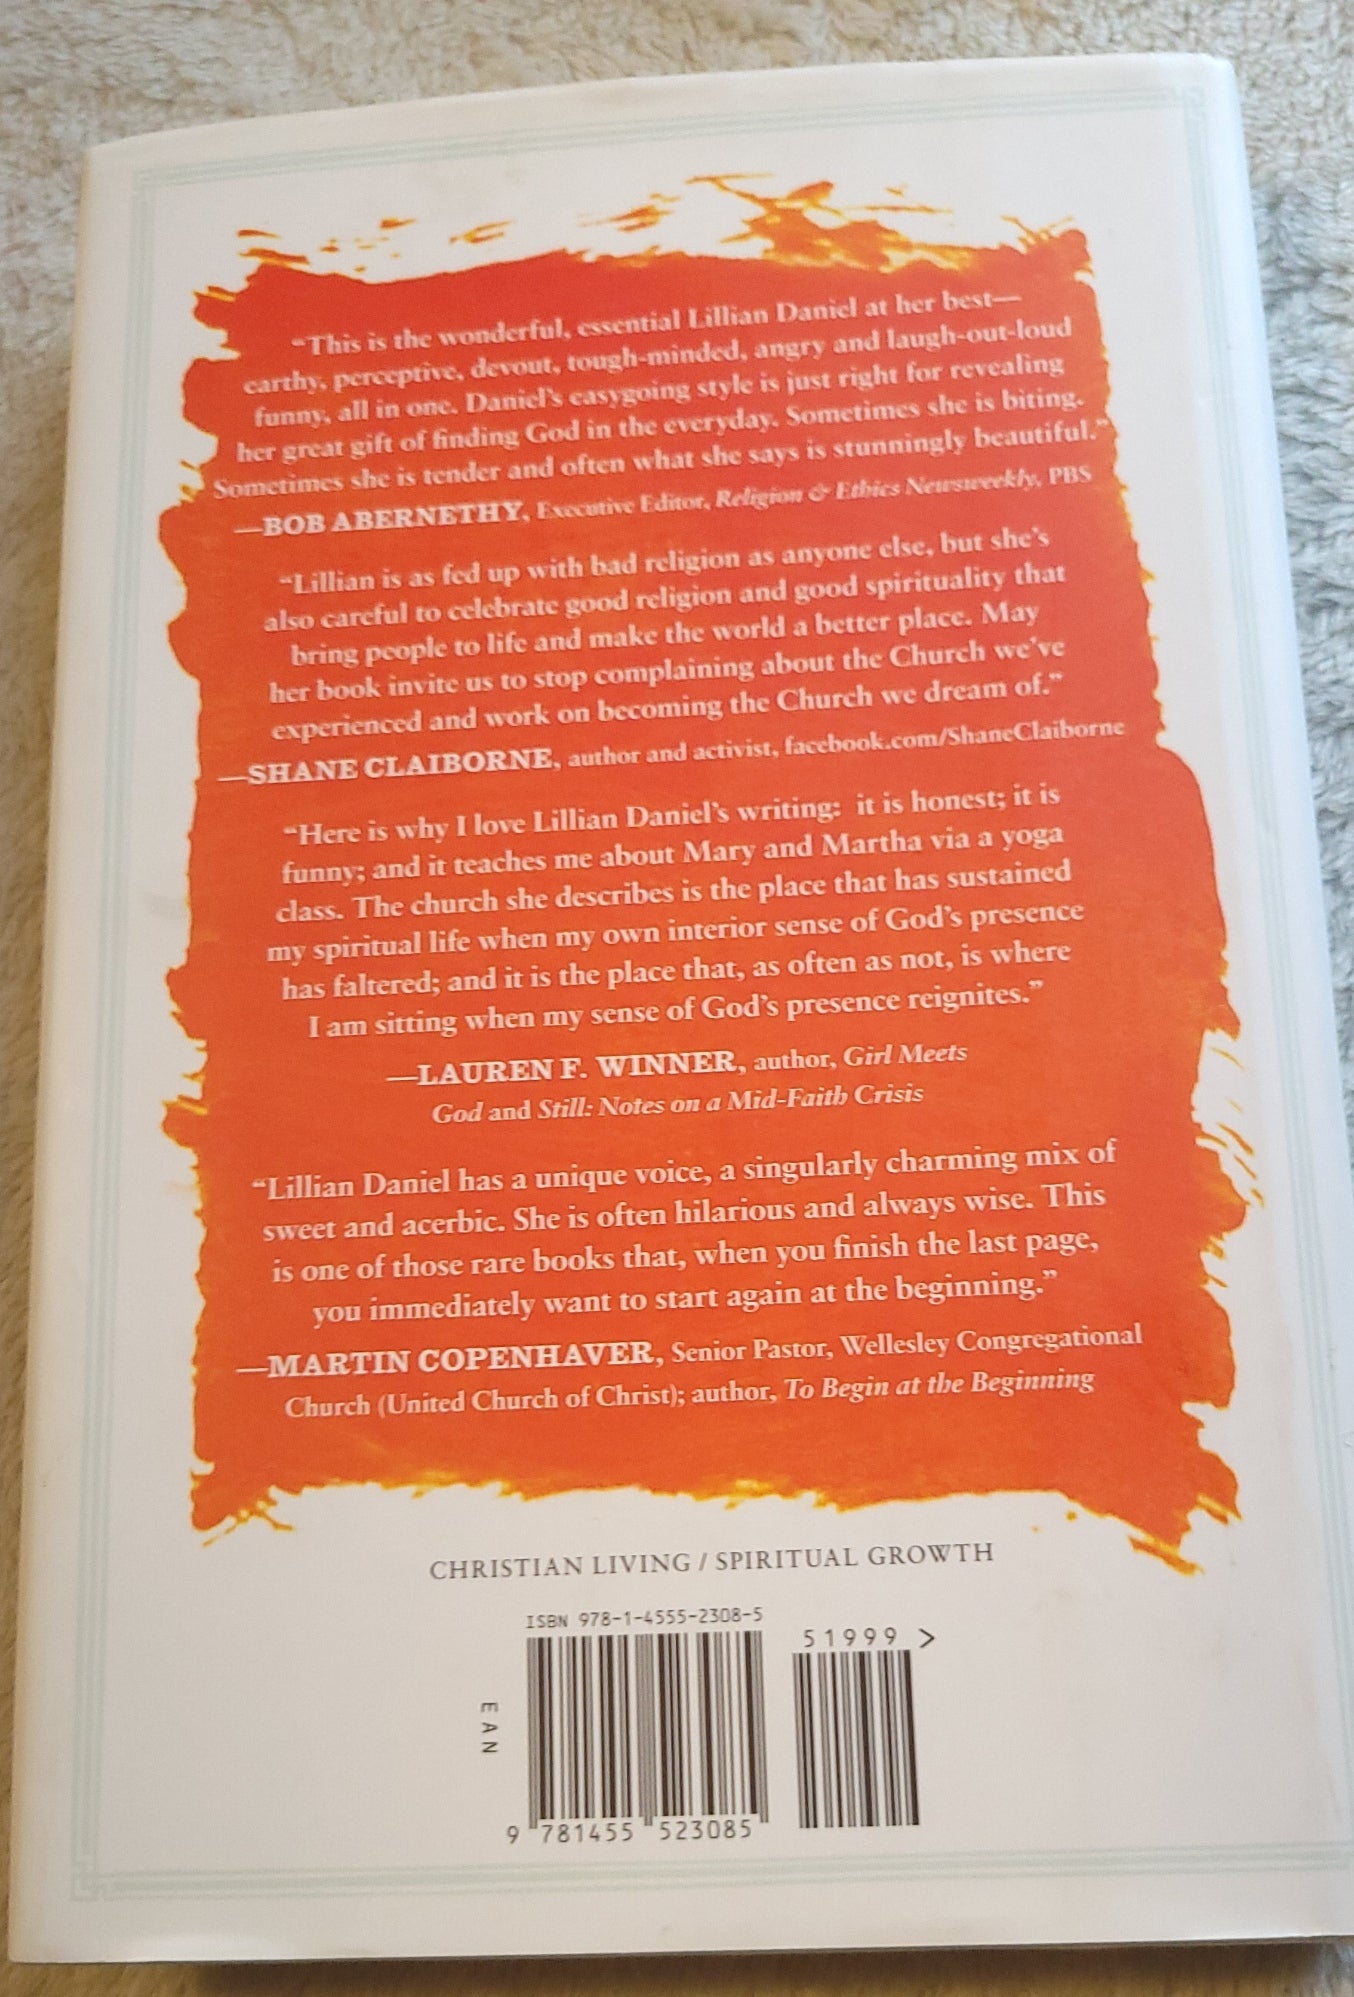 Used book for sale "When "Spiritual but Not Religious" Is Not Enough: Seeing God in Surprising Places, Even the Church" by Lillian Daniel, published by Jericho Books, 2014. Back cover.